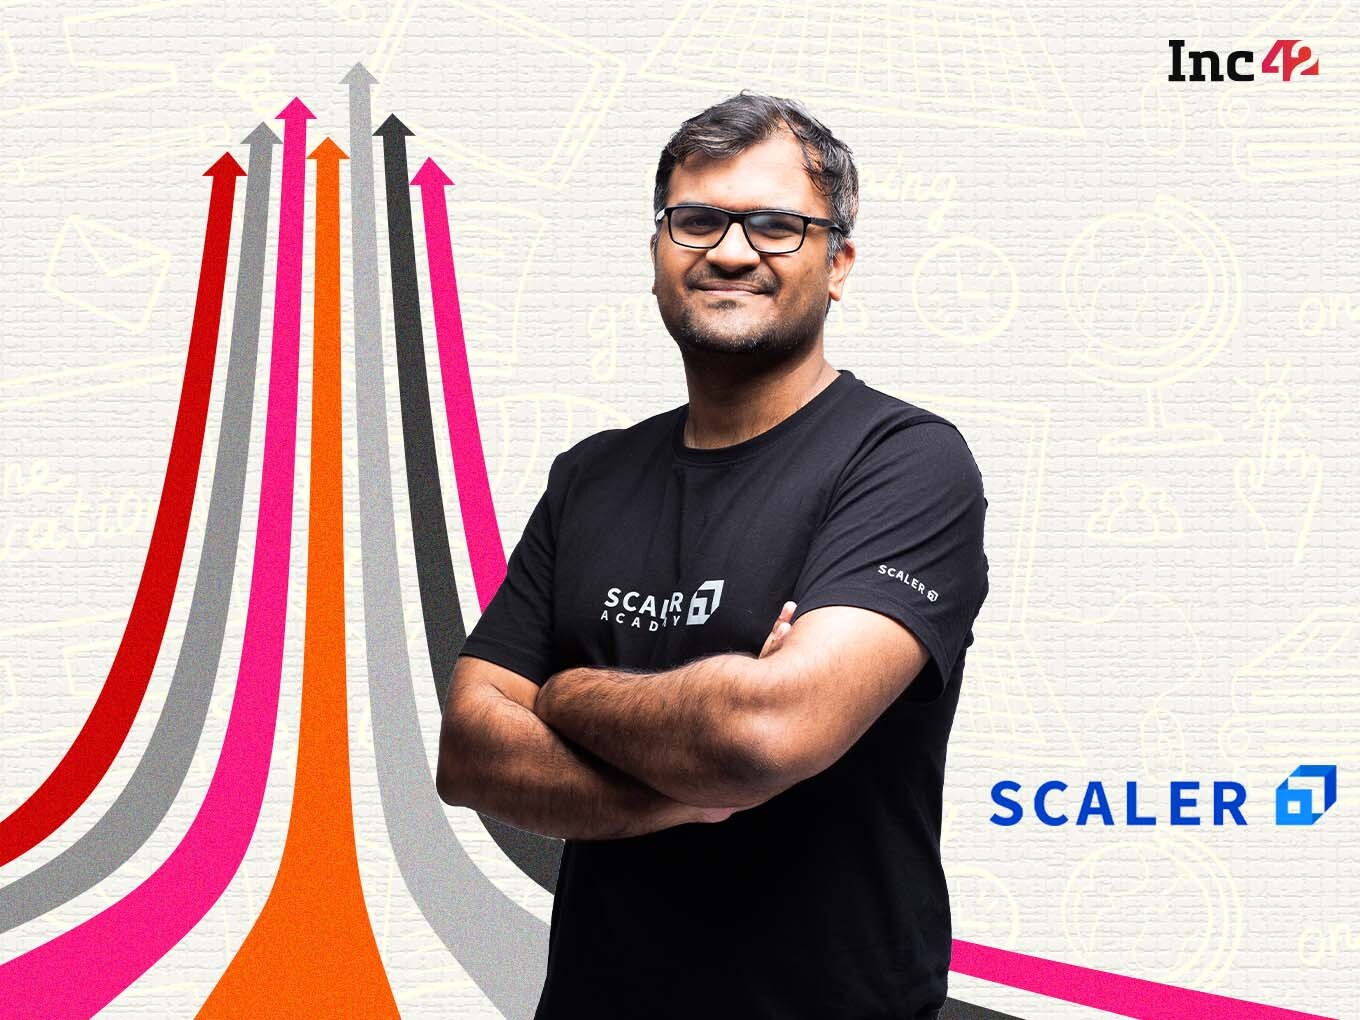 Scalar Academy's US Foray Now Clocking $1 Mn Monthly In 3 Months